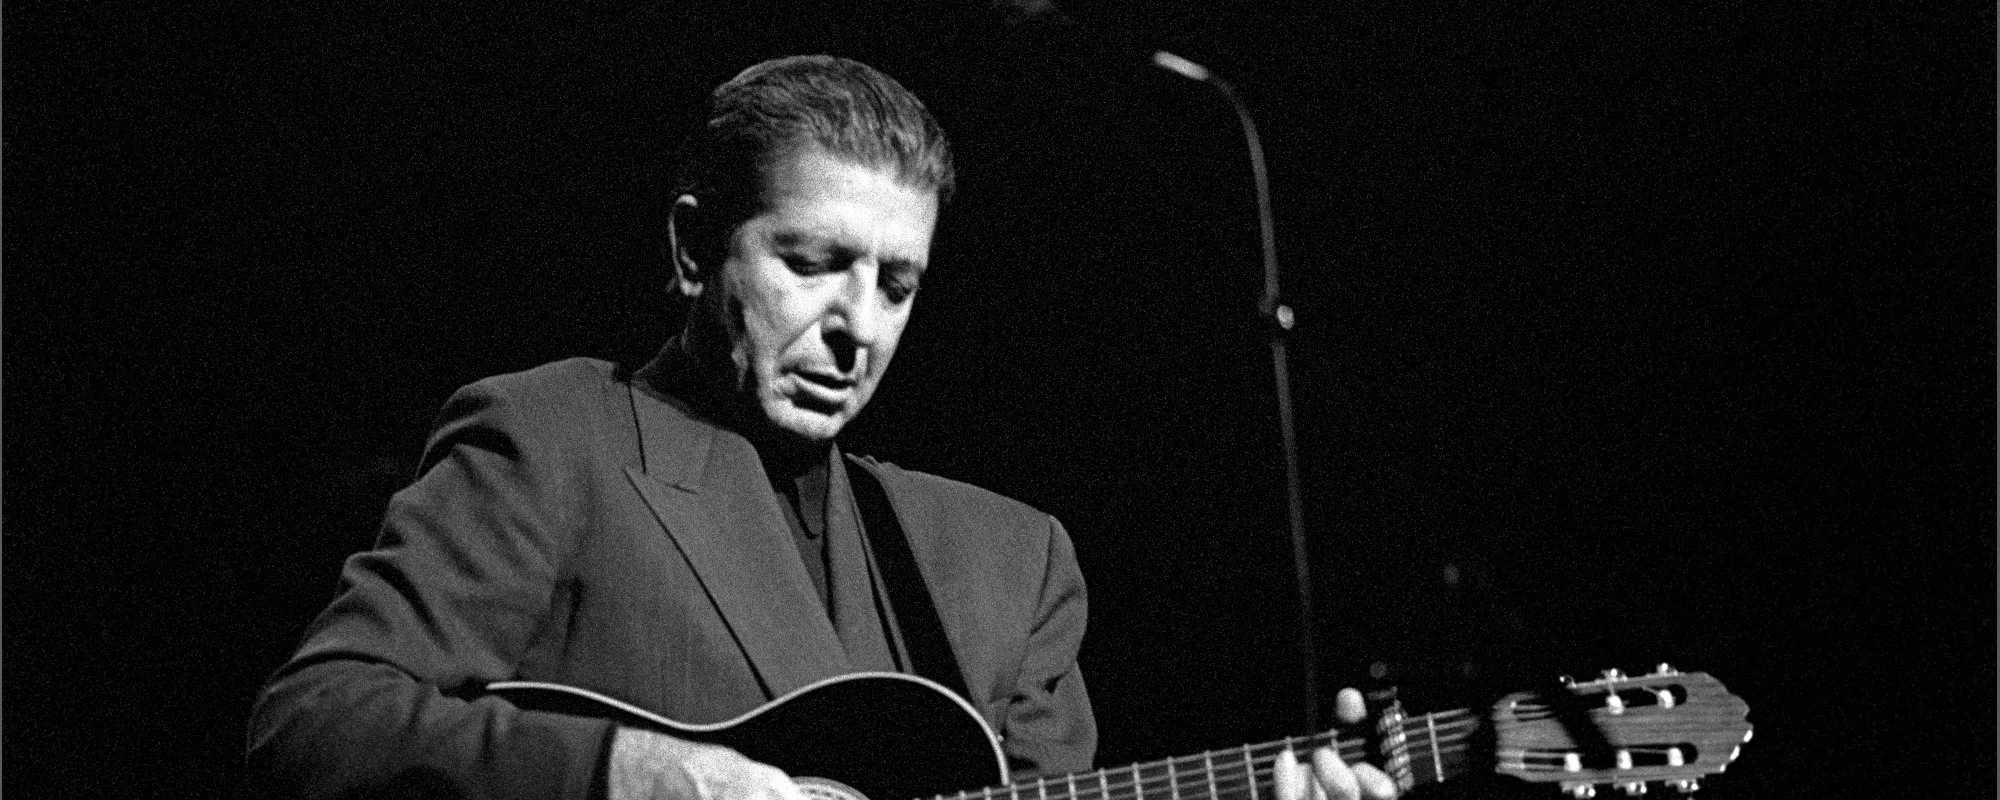 The Meaning Behind “Chelsea Hotel #2” by Leonard Cohen